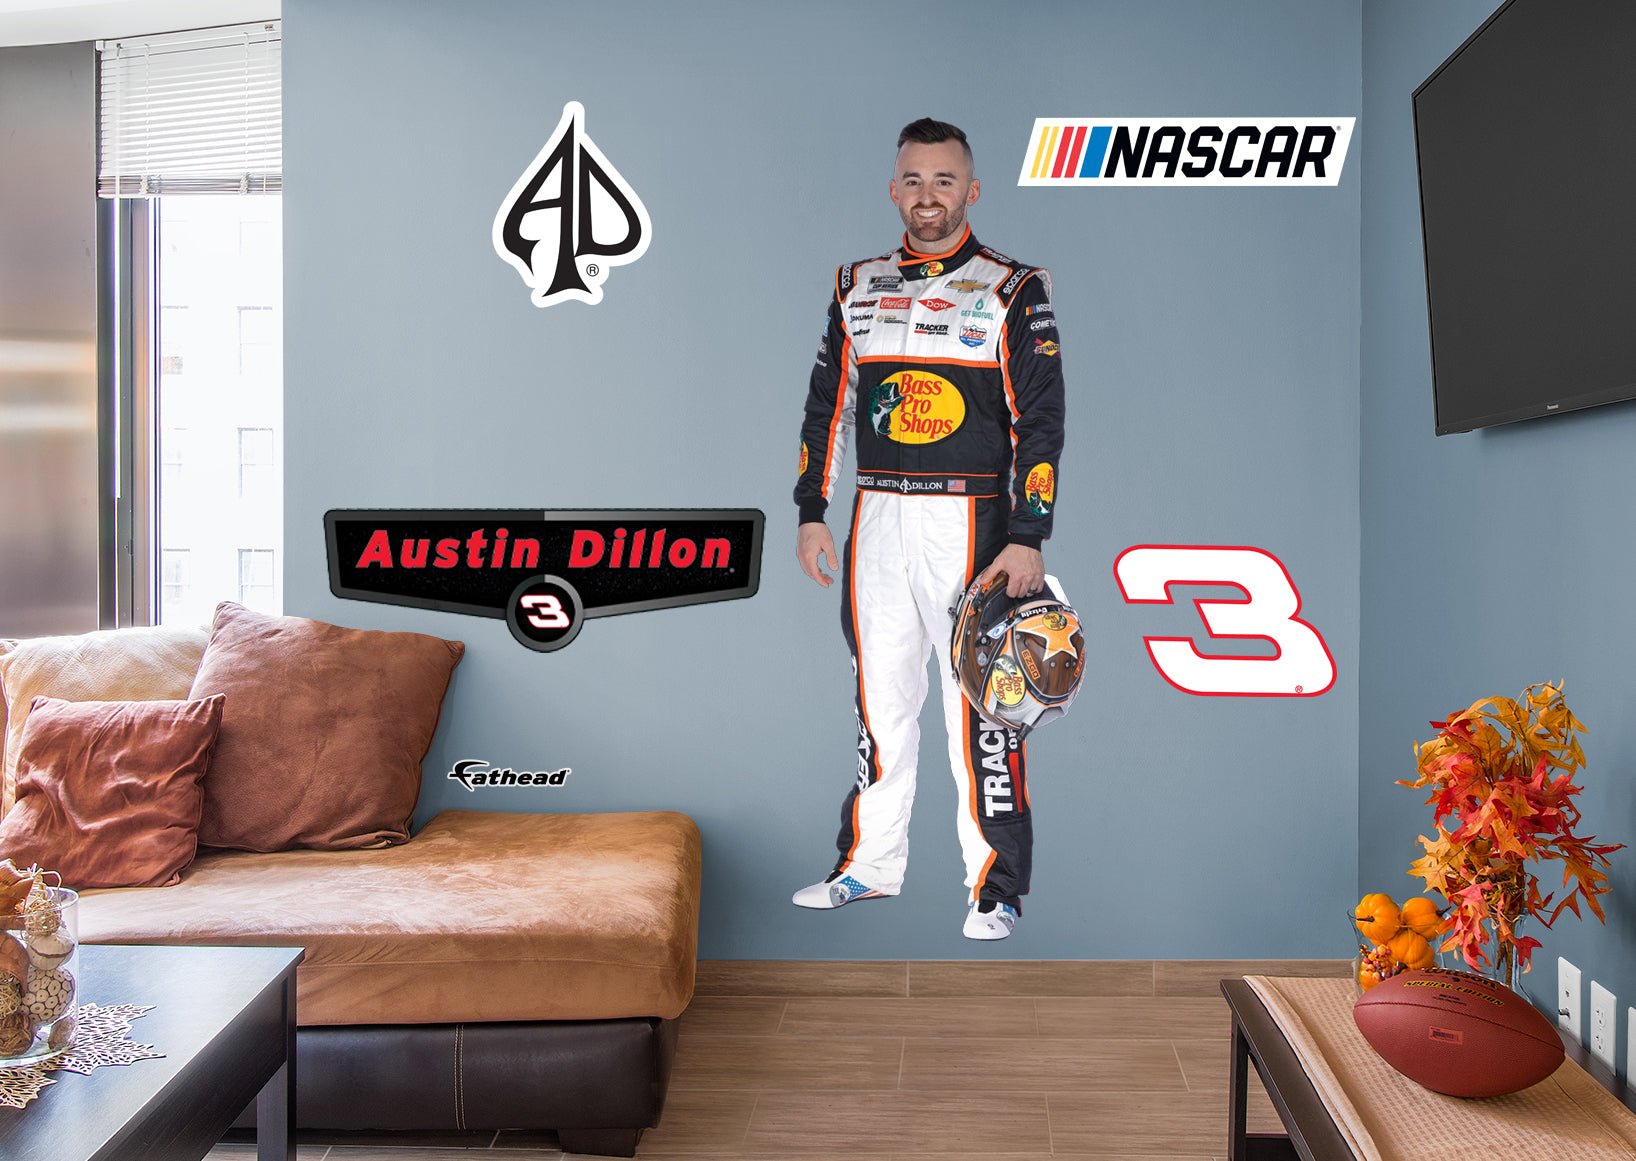 Austin Dillon 2021 Driver - Officially Licensed NASCAR Removable Wall Decal Life-Size Character + 5 Decals (28"W x 78"H) by Fath